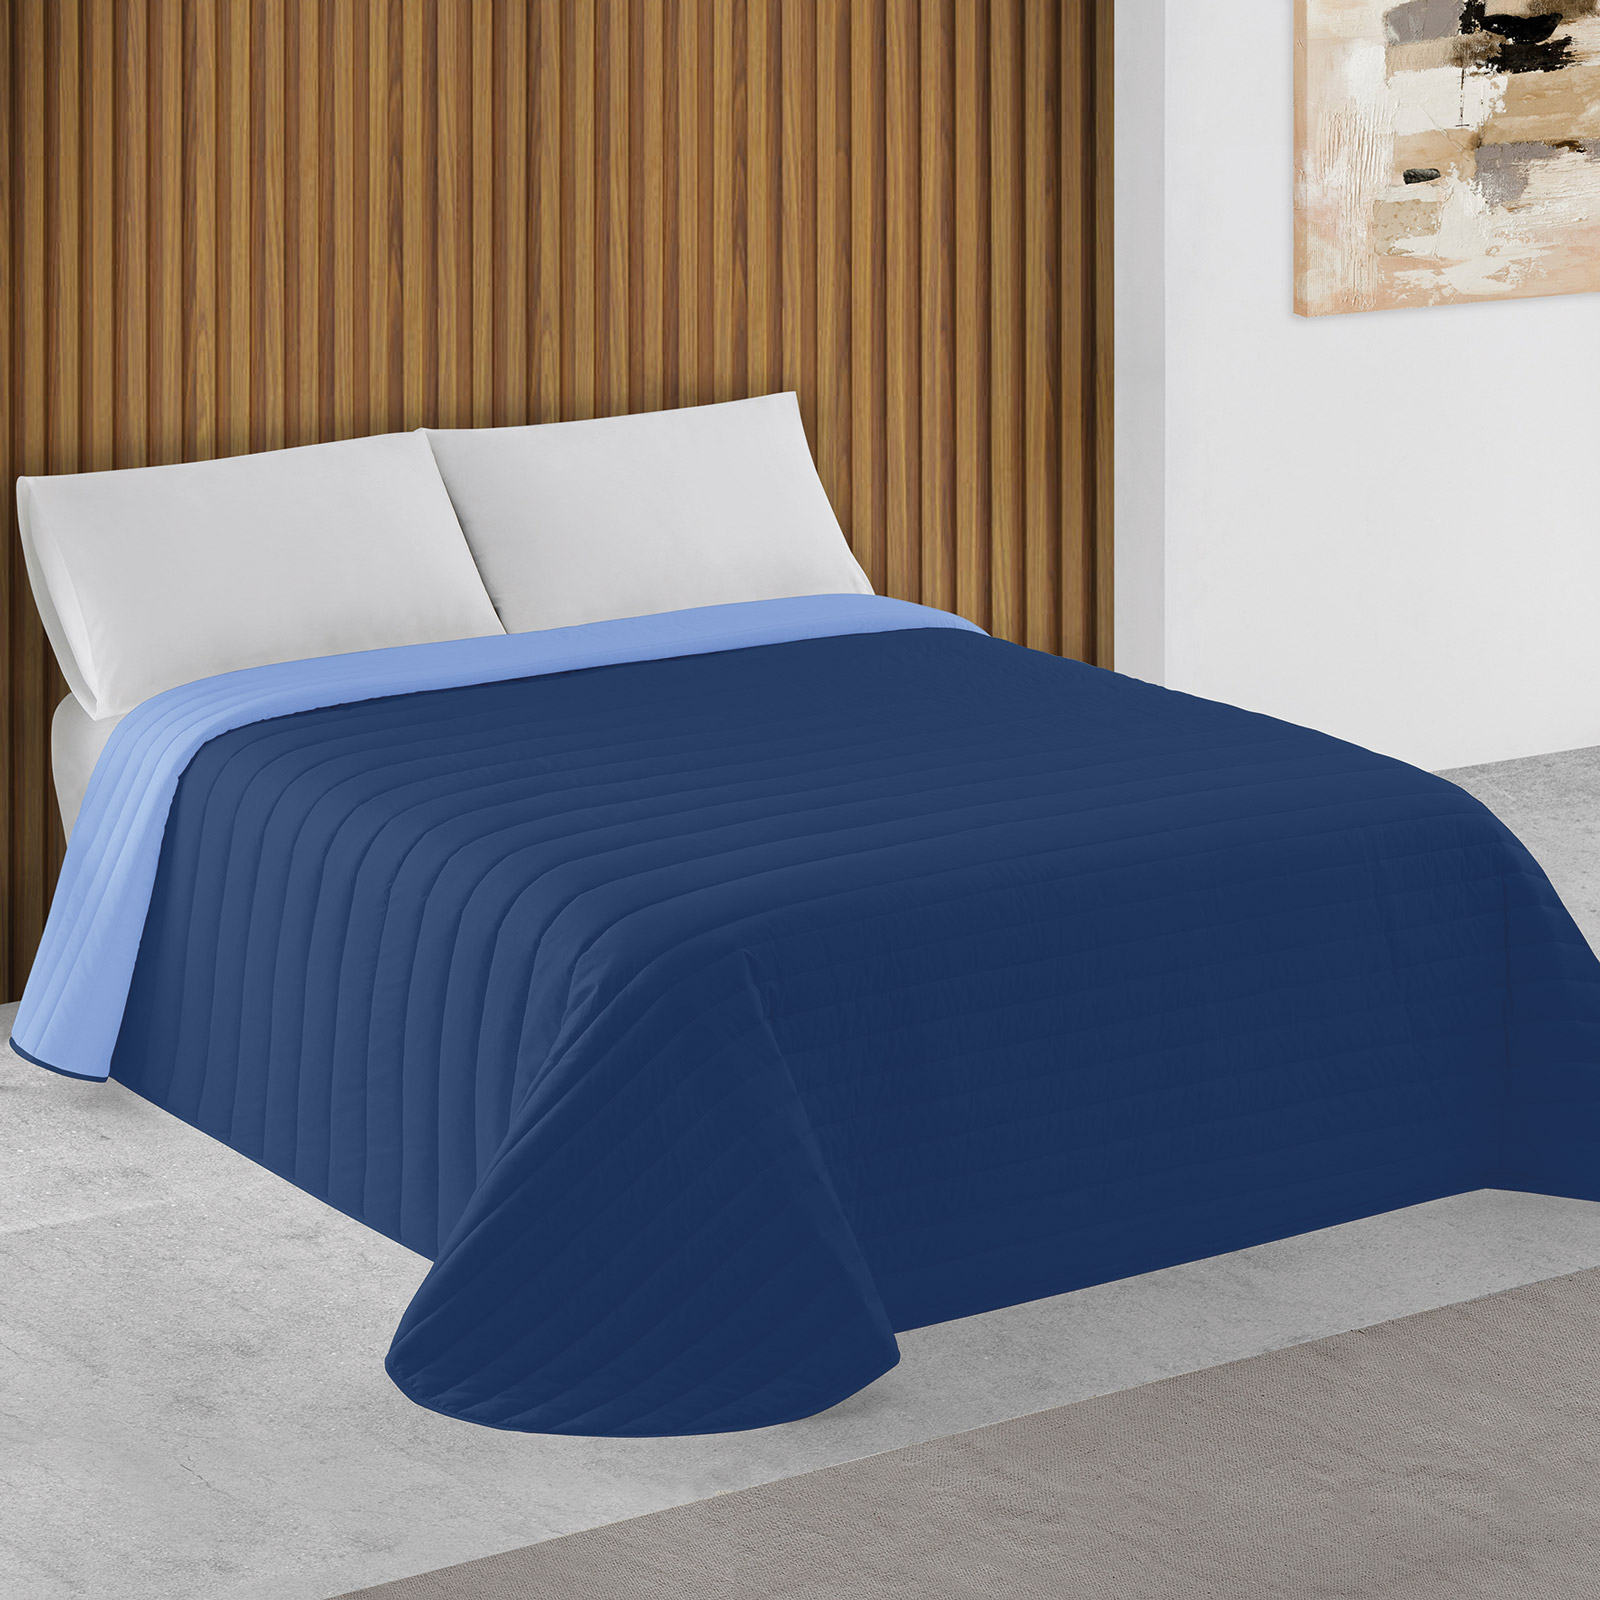 Two-tone Bouti bedspread navy blue and light blue